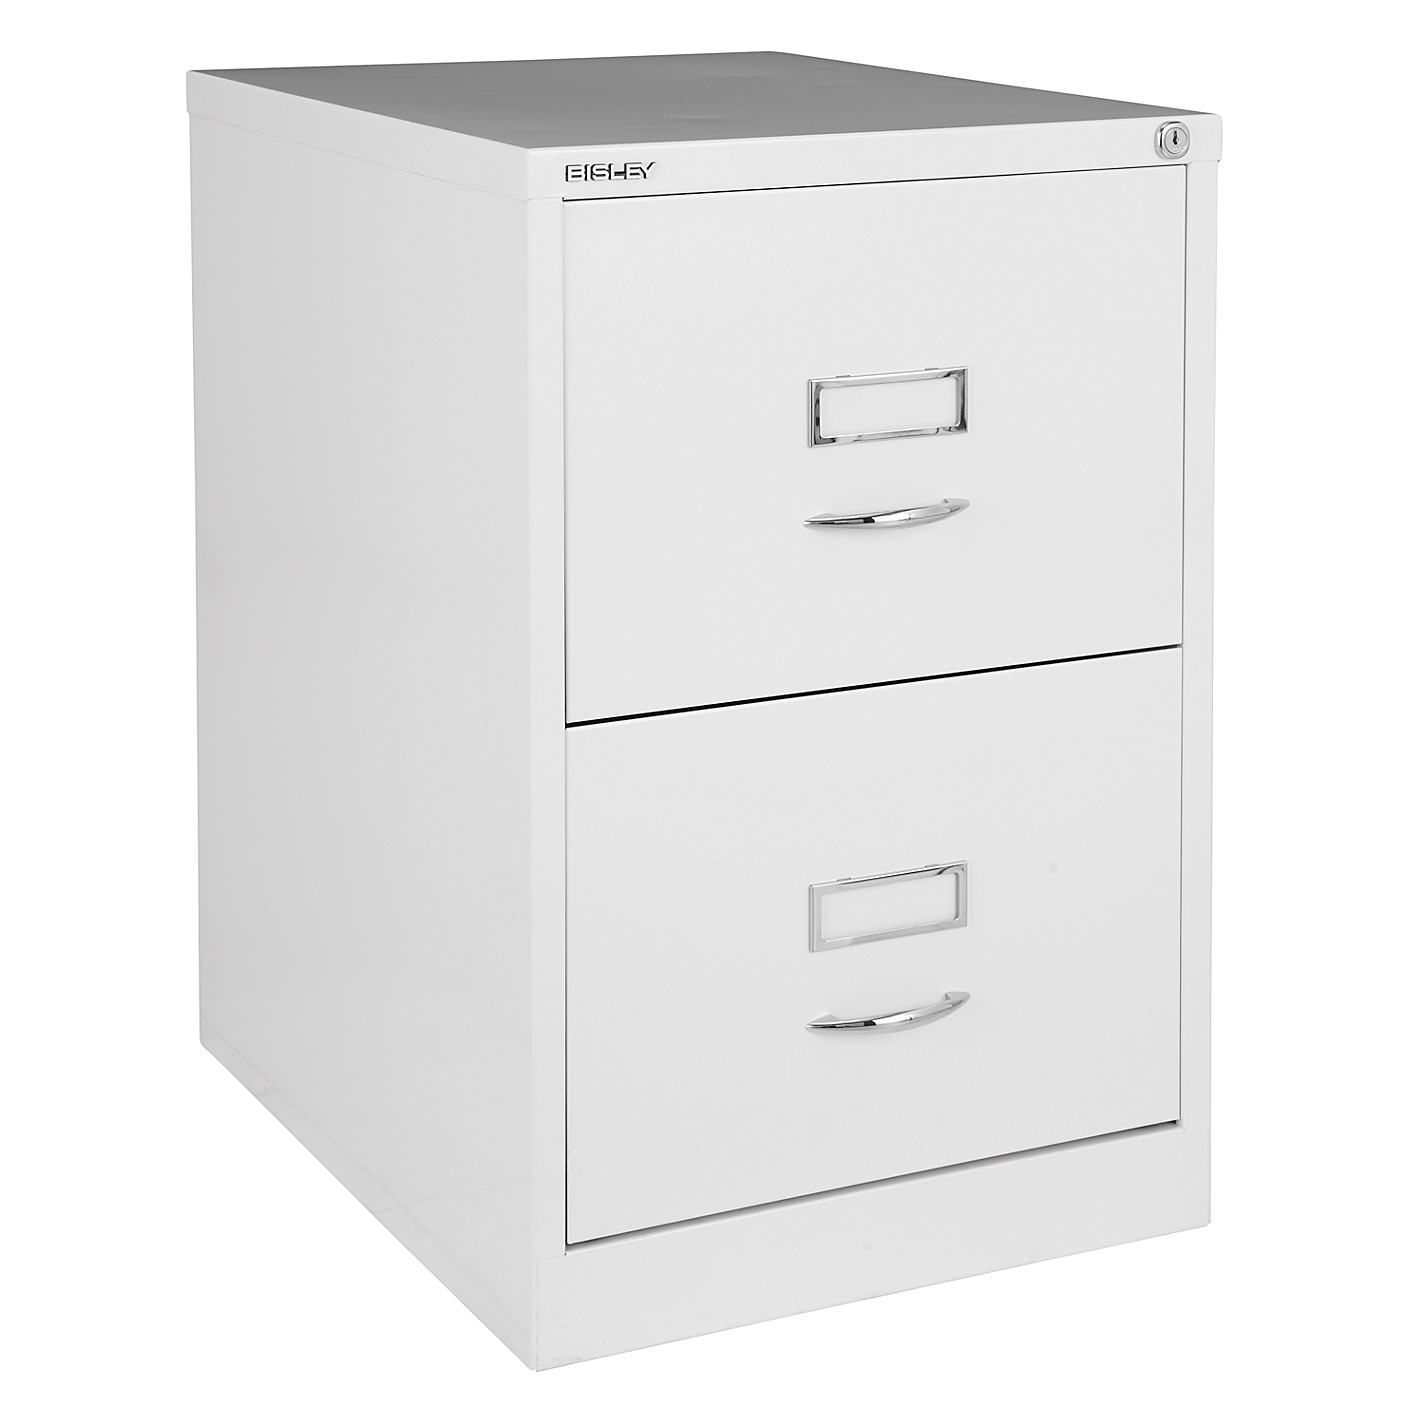 Incredible Small Metal Filing Cabinet Hon Filing Cabinets Old Filing in measurements 1425 X 1425